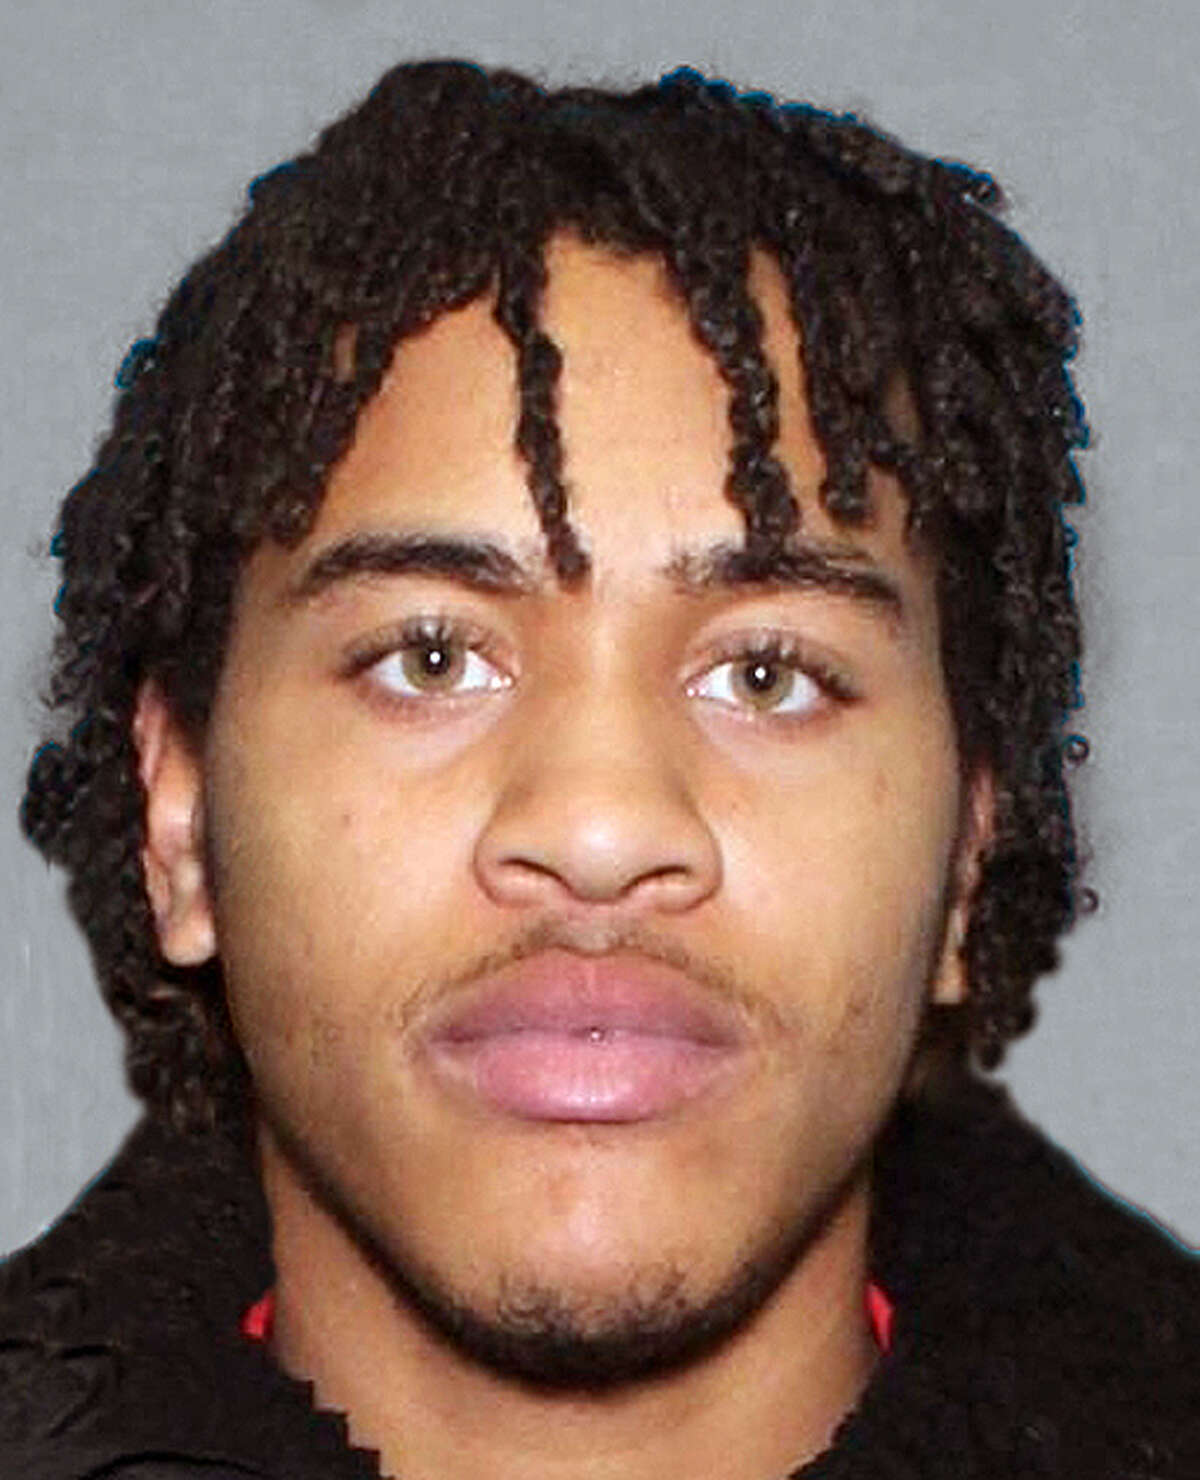 Police are looking for Deon Howard, 23, of Rockford, who faces charges of abuse of a corpse and possession of a stolen vehicle.